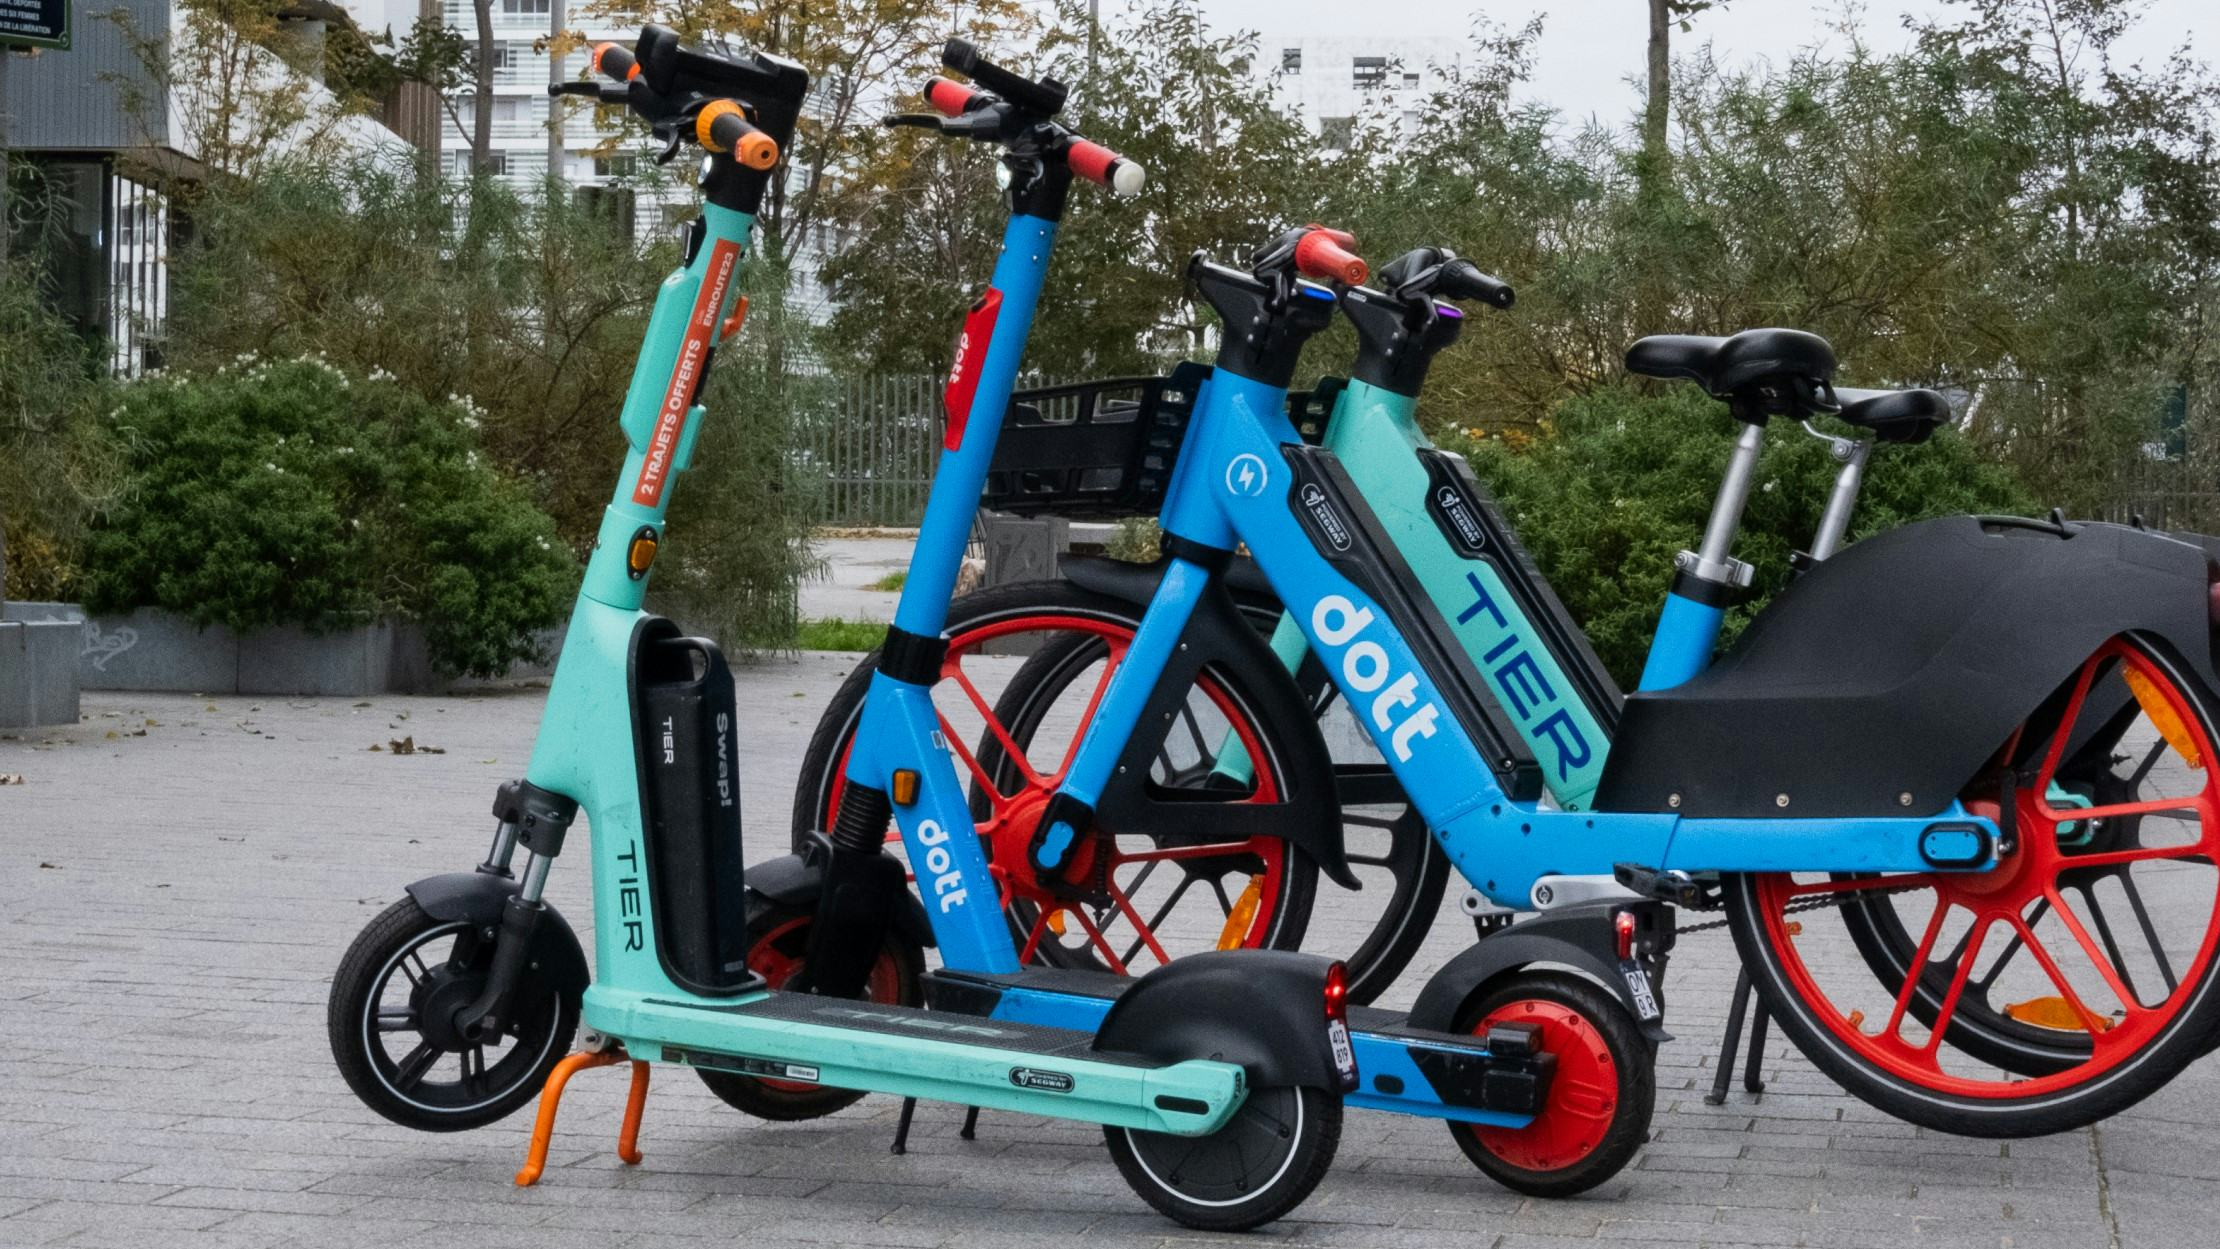 Tier and Dott both offer e-bike services in several cities in Europe. – Photo Dott